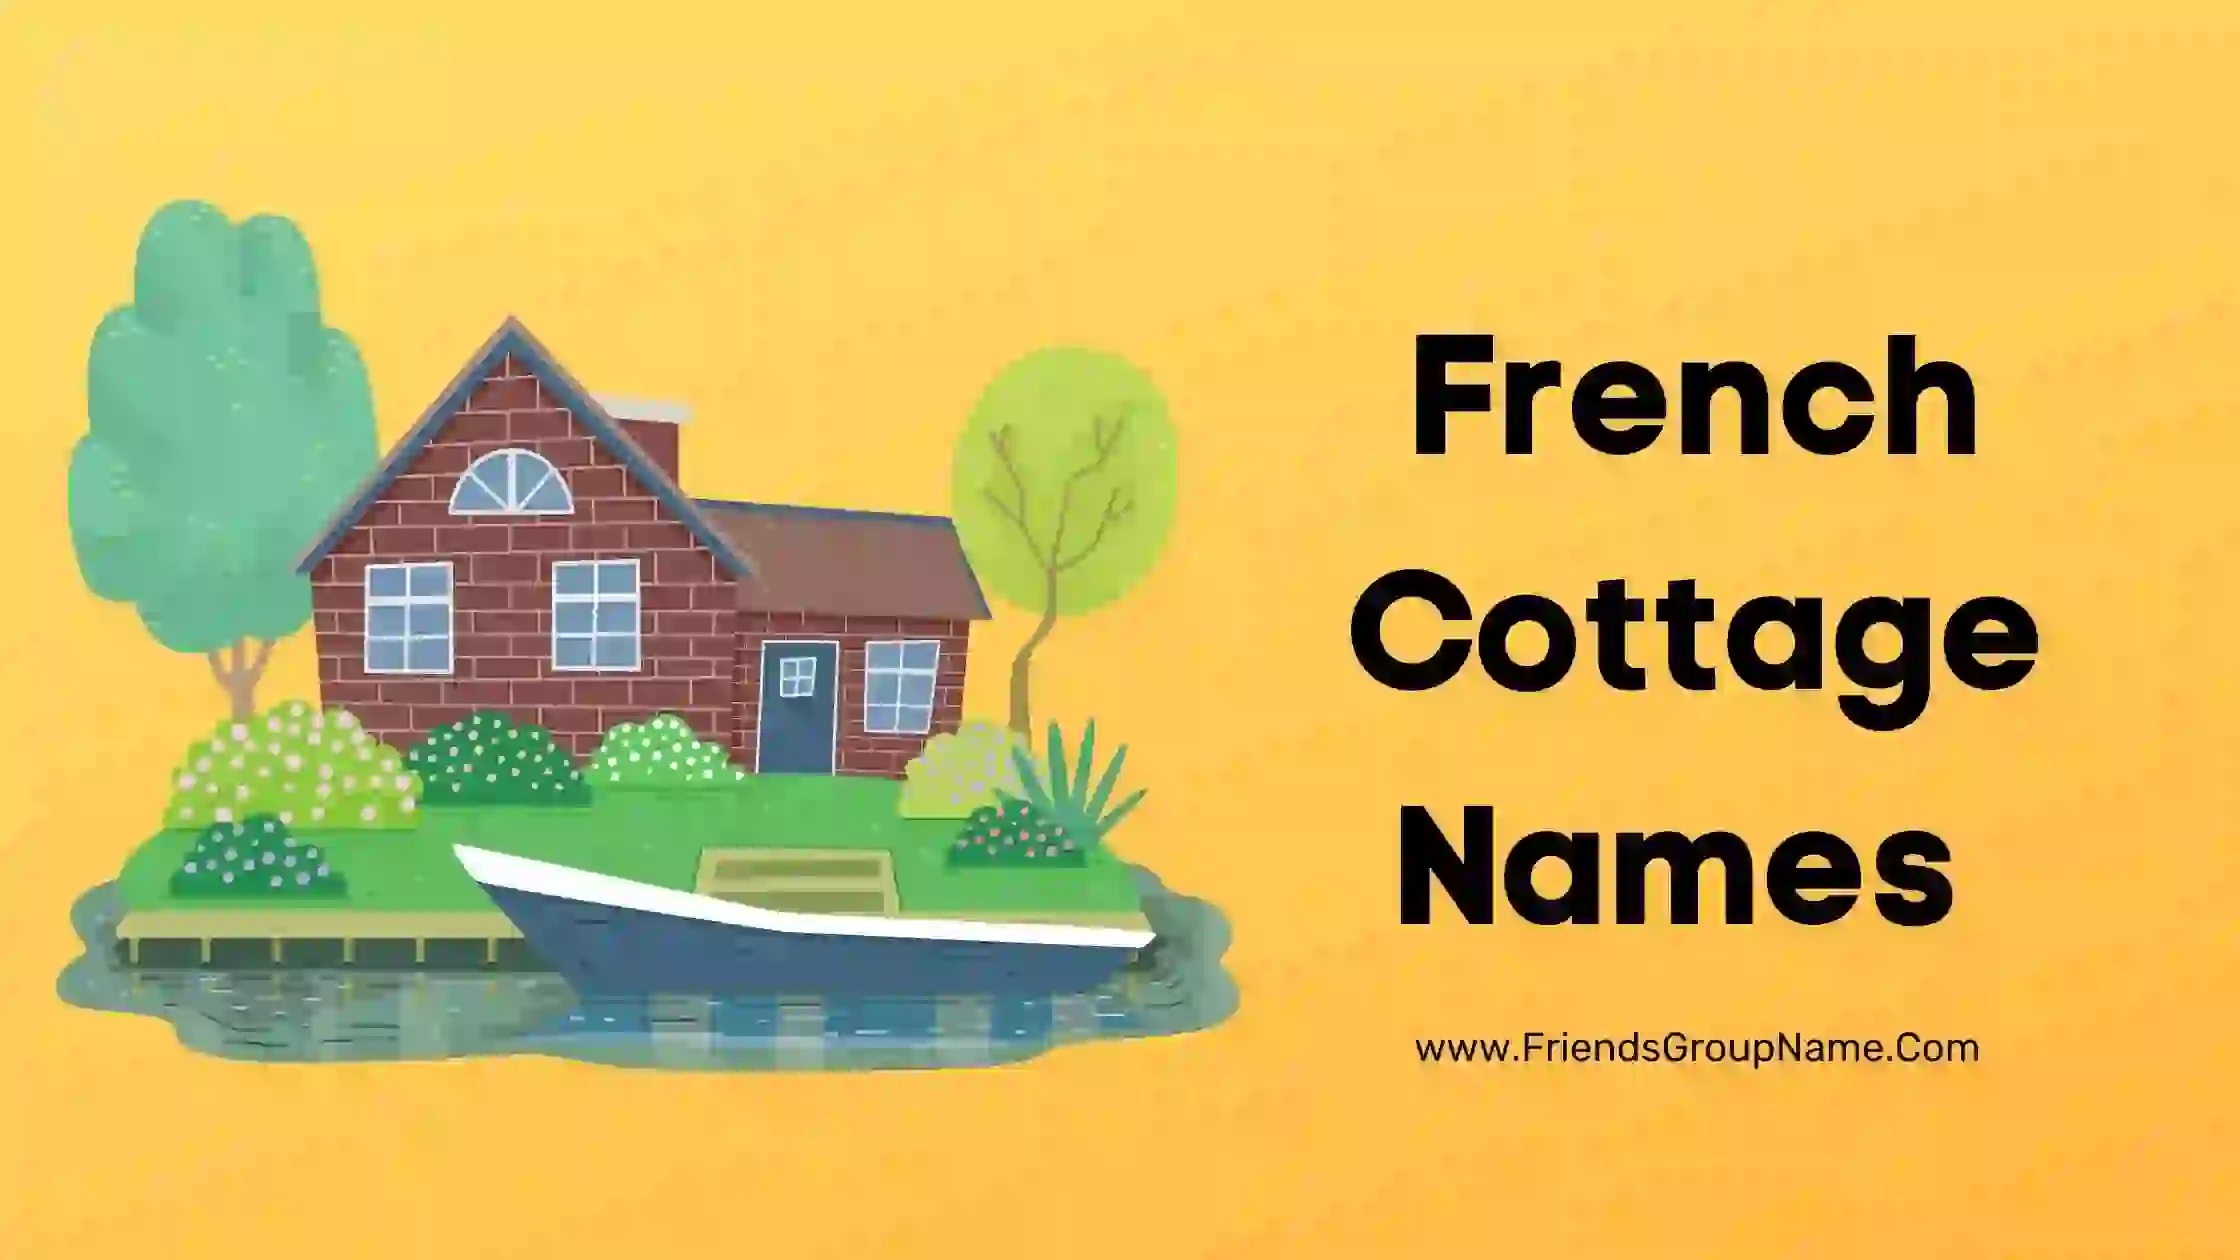 French Cottage Names